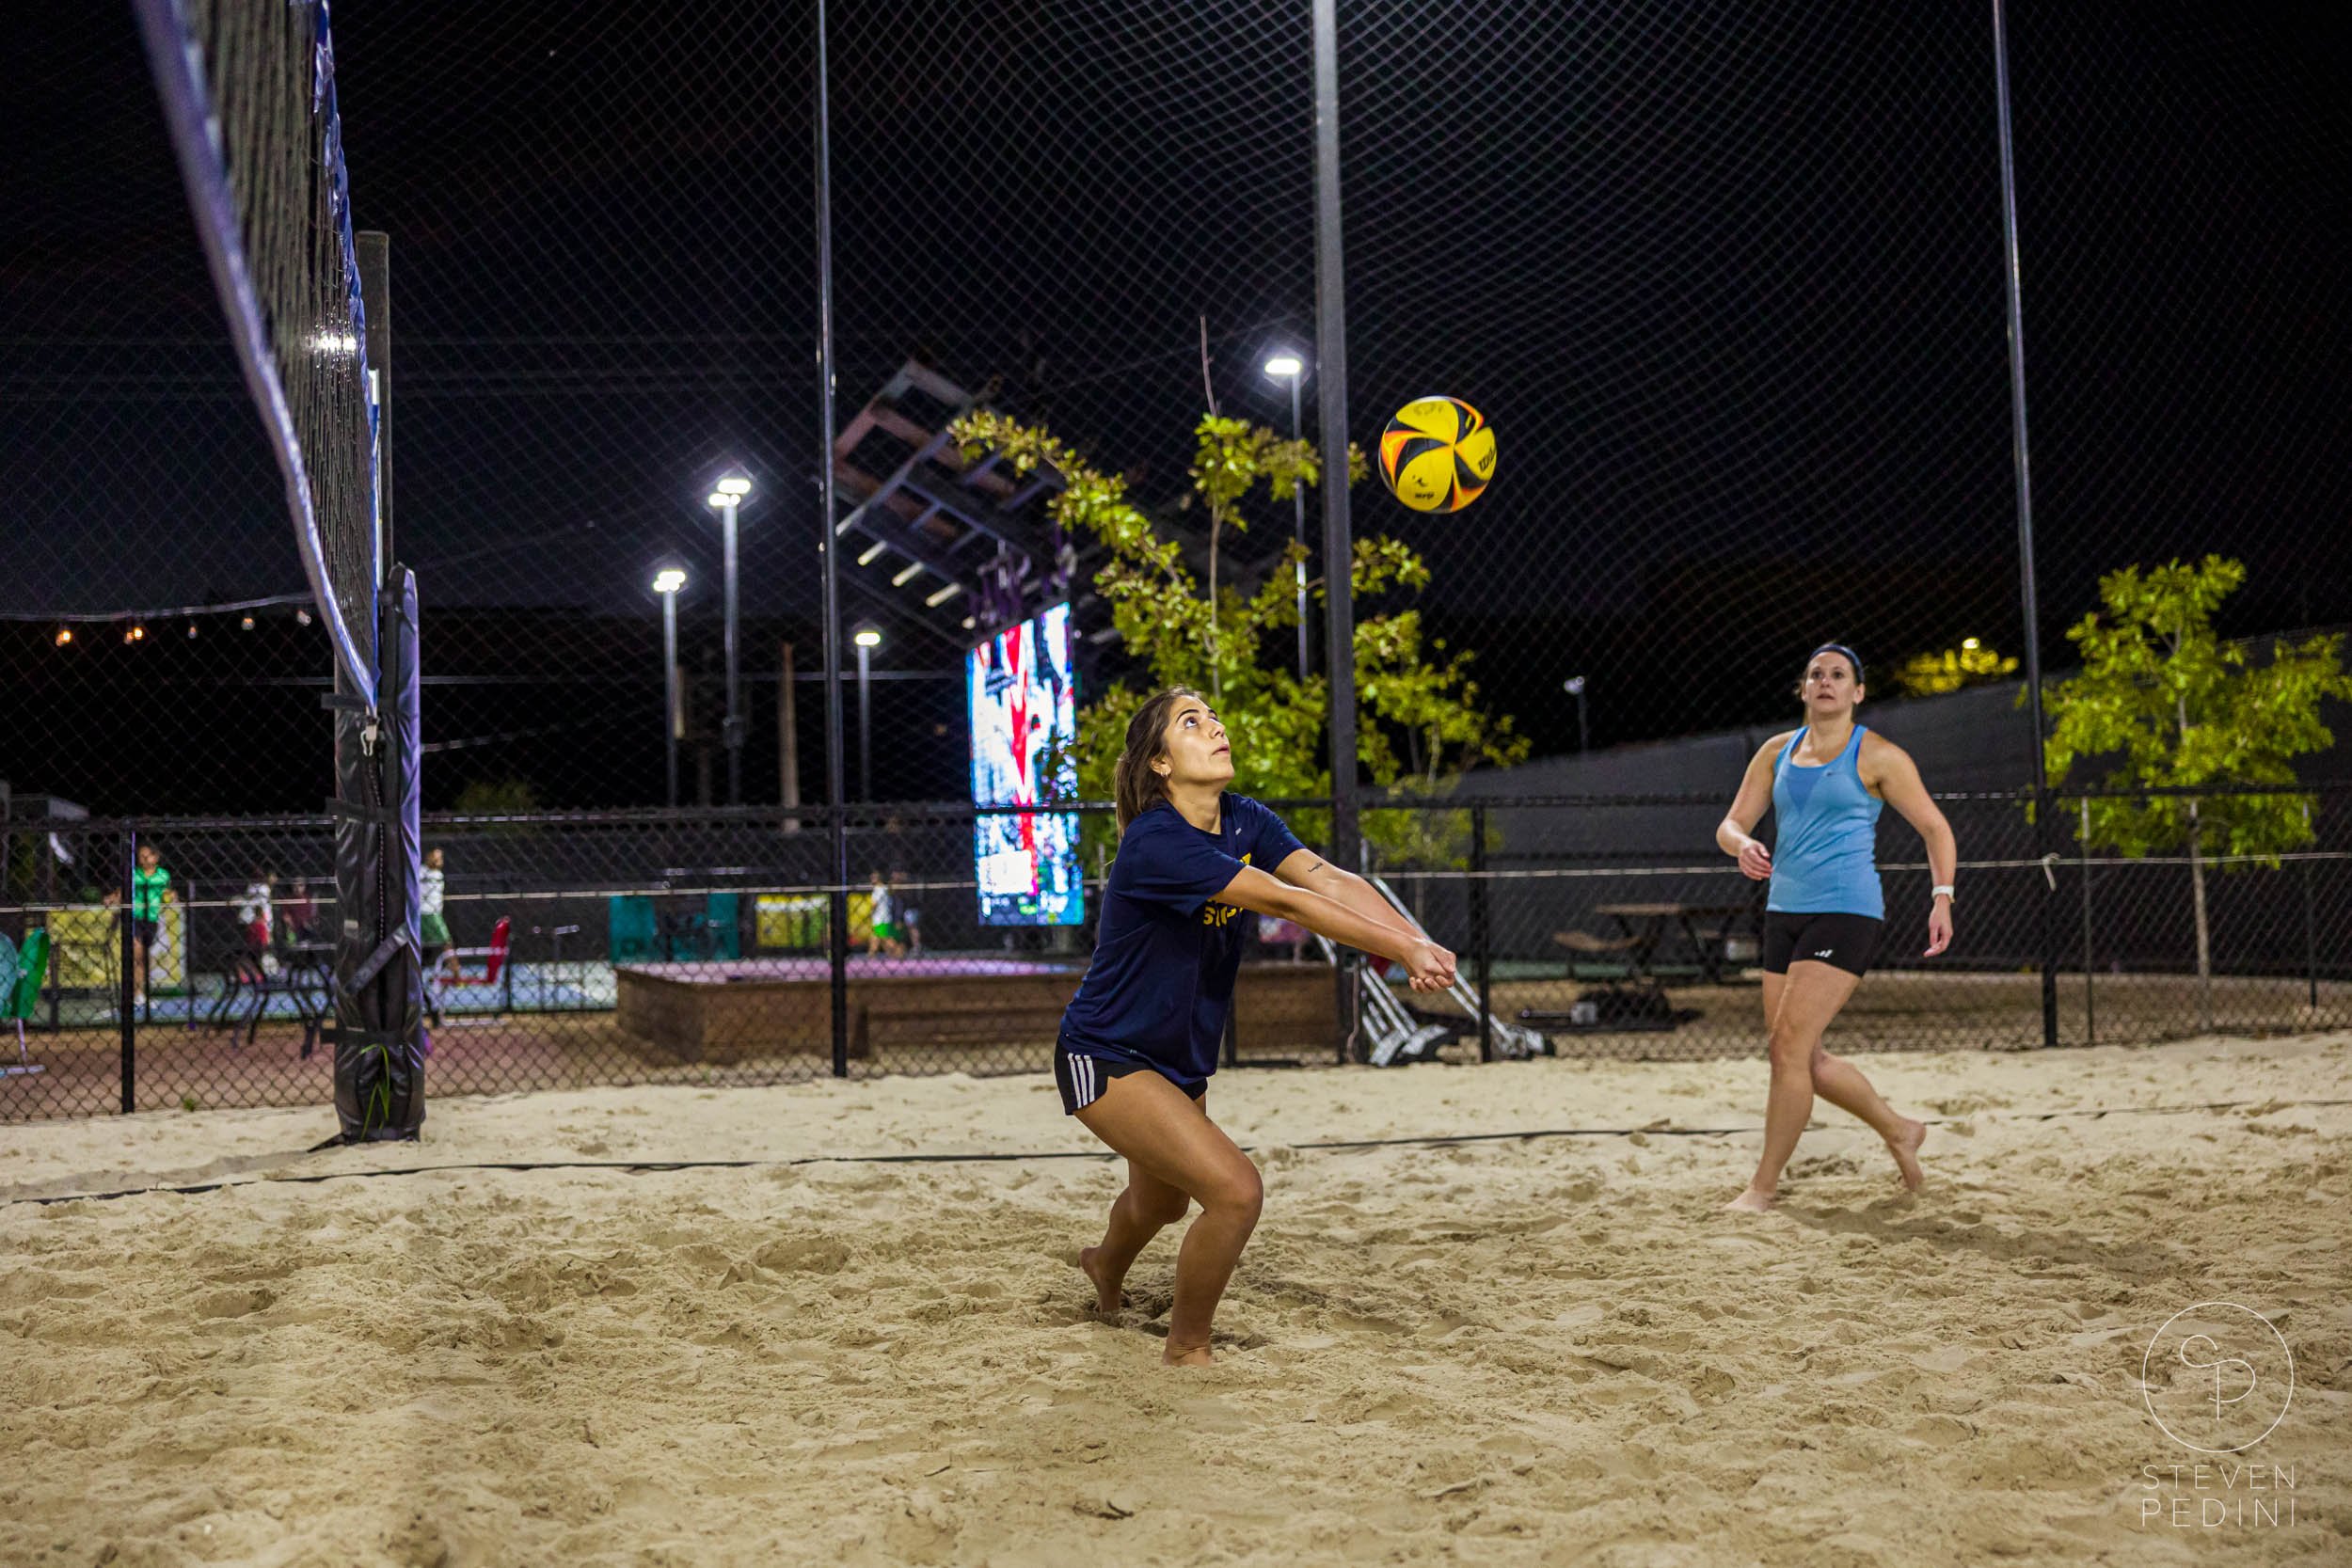 Steven Pedini Photography - Bumpy Pickle - Sand Volleyball - Houston TX - World Cup of Volleyball - 00384.jpg